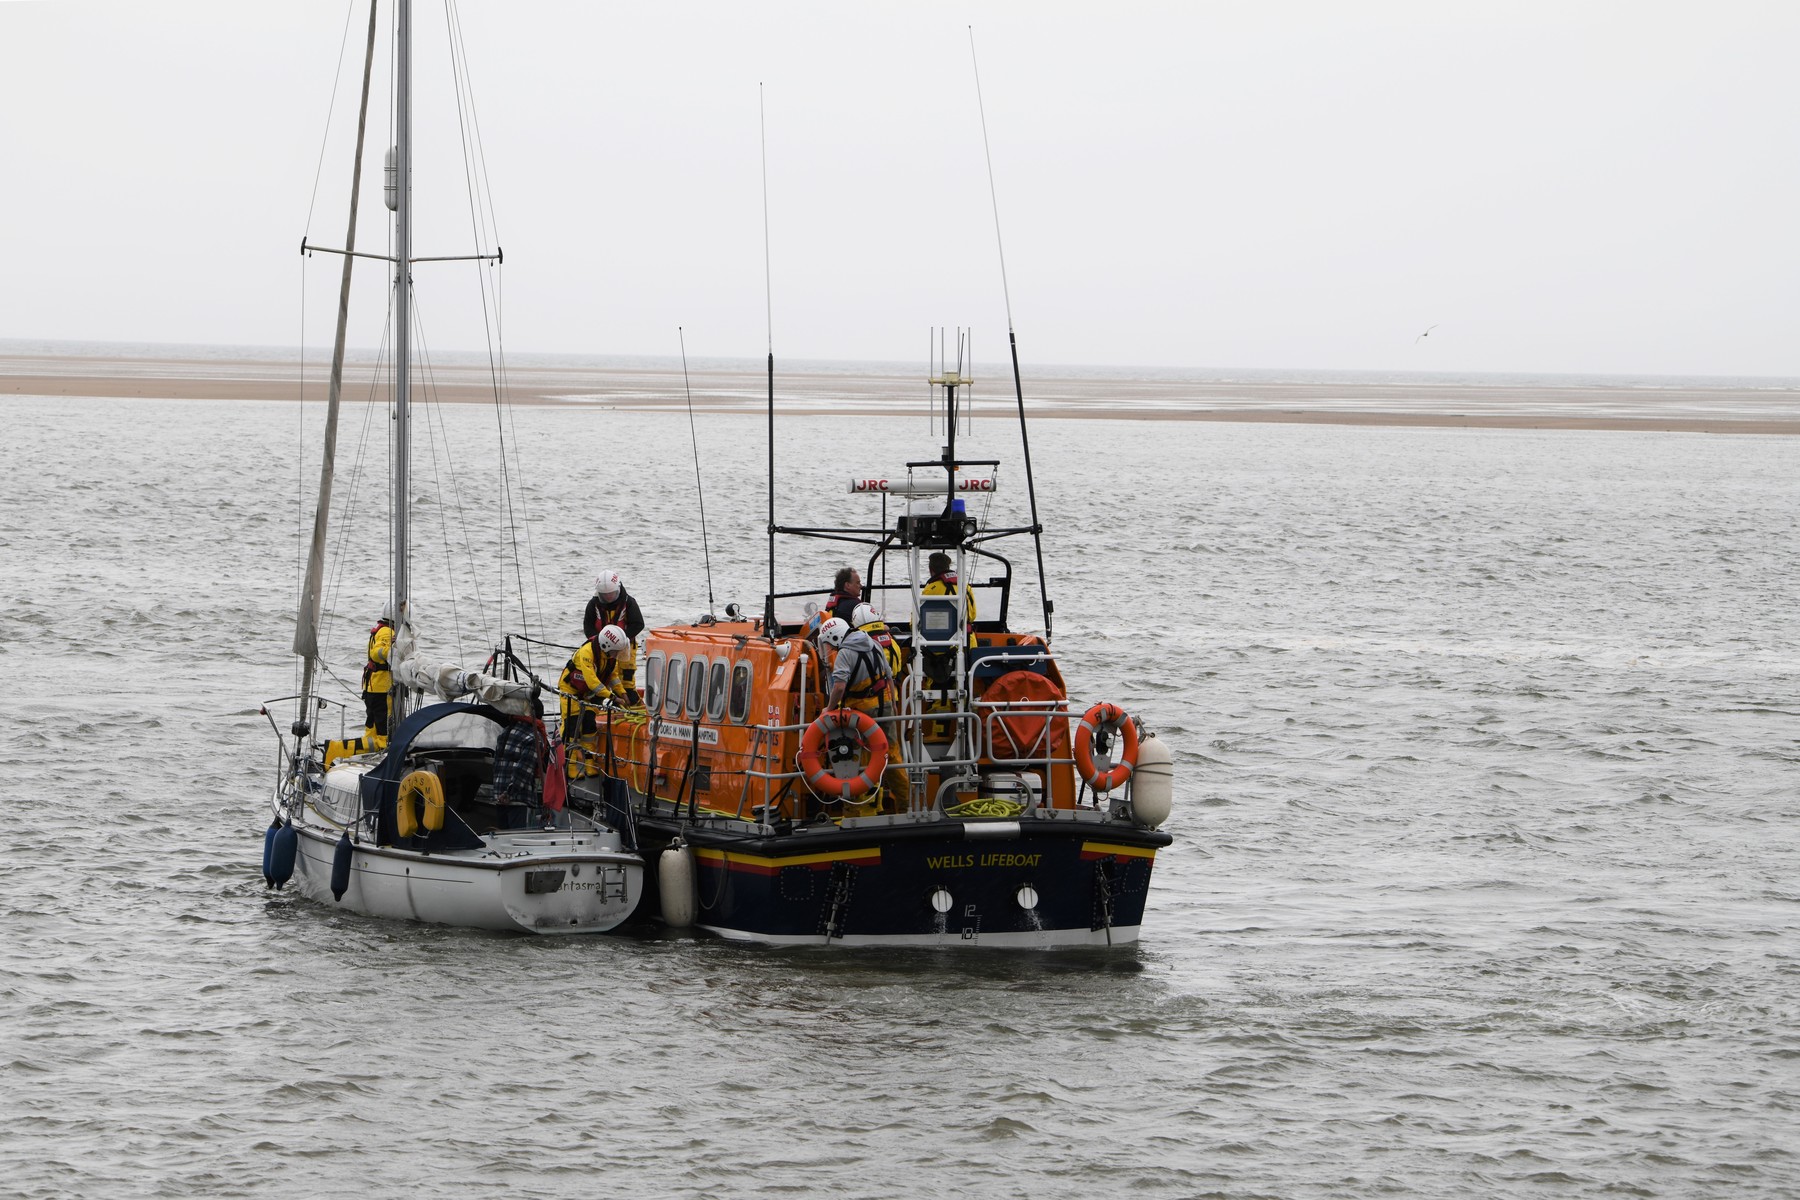 Off Wells beach, the yacht is brought alongside the lifeboat prior to being safely berthed, 15/5/22